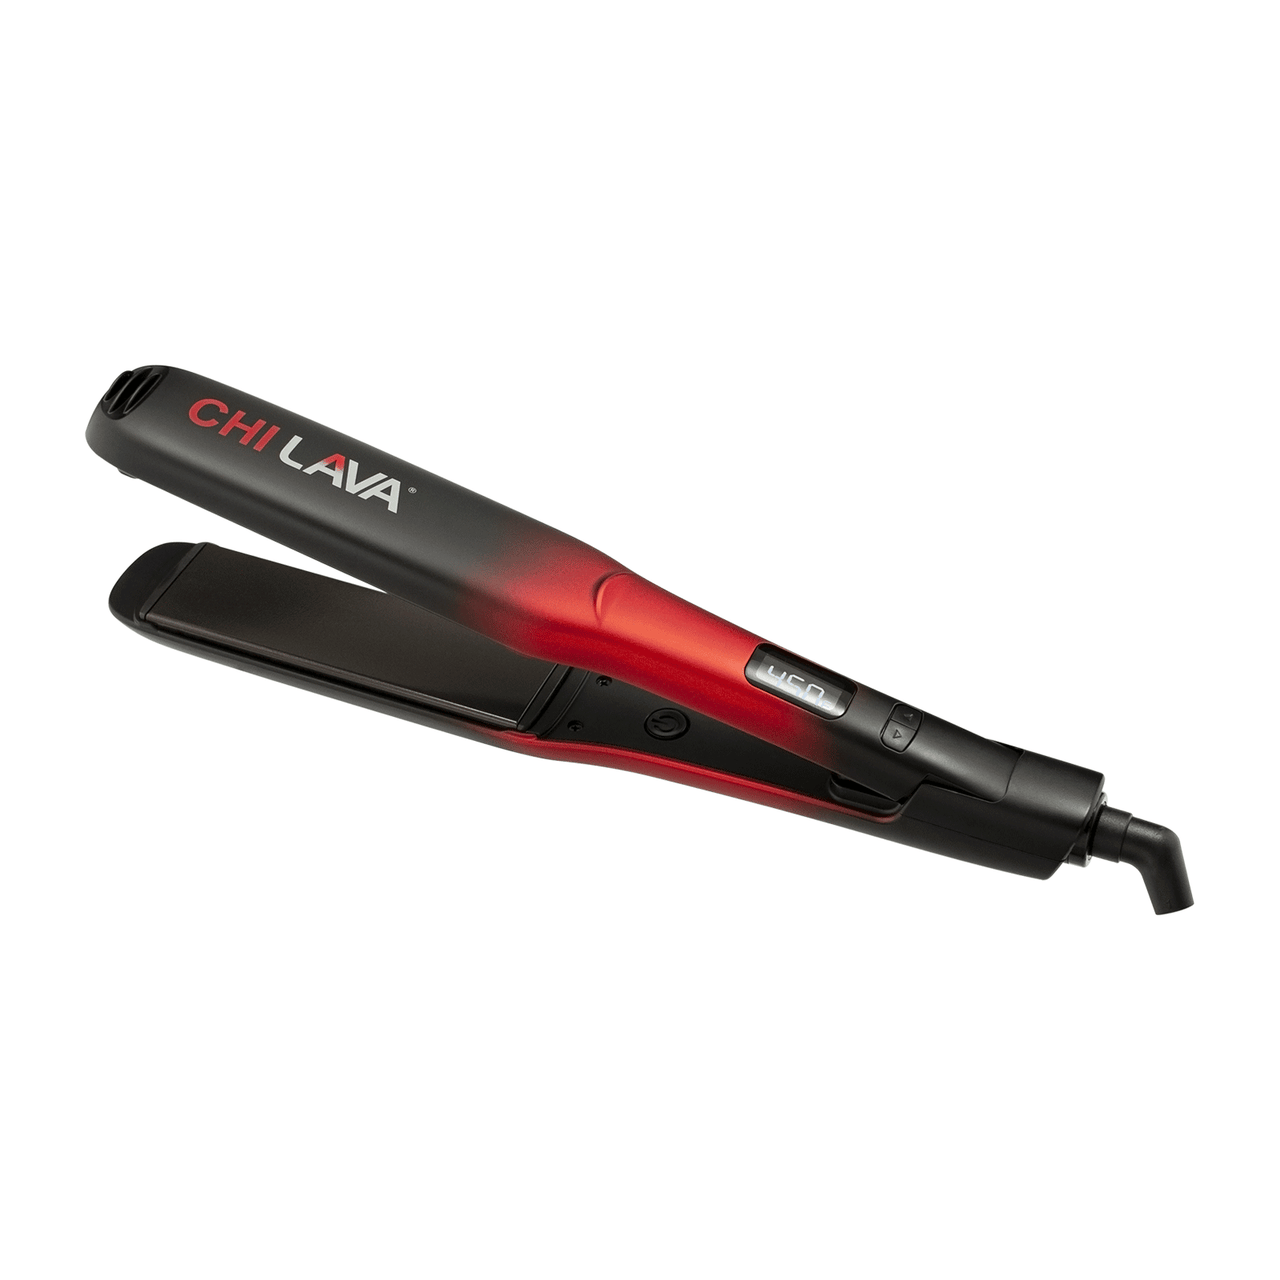 CHI CHI Lava Volcanic Ceramic Hairstyling Iron - 1.5 Inch 1 Each